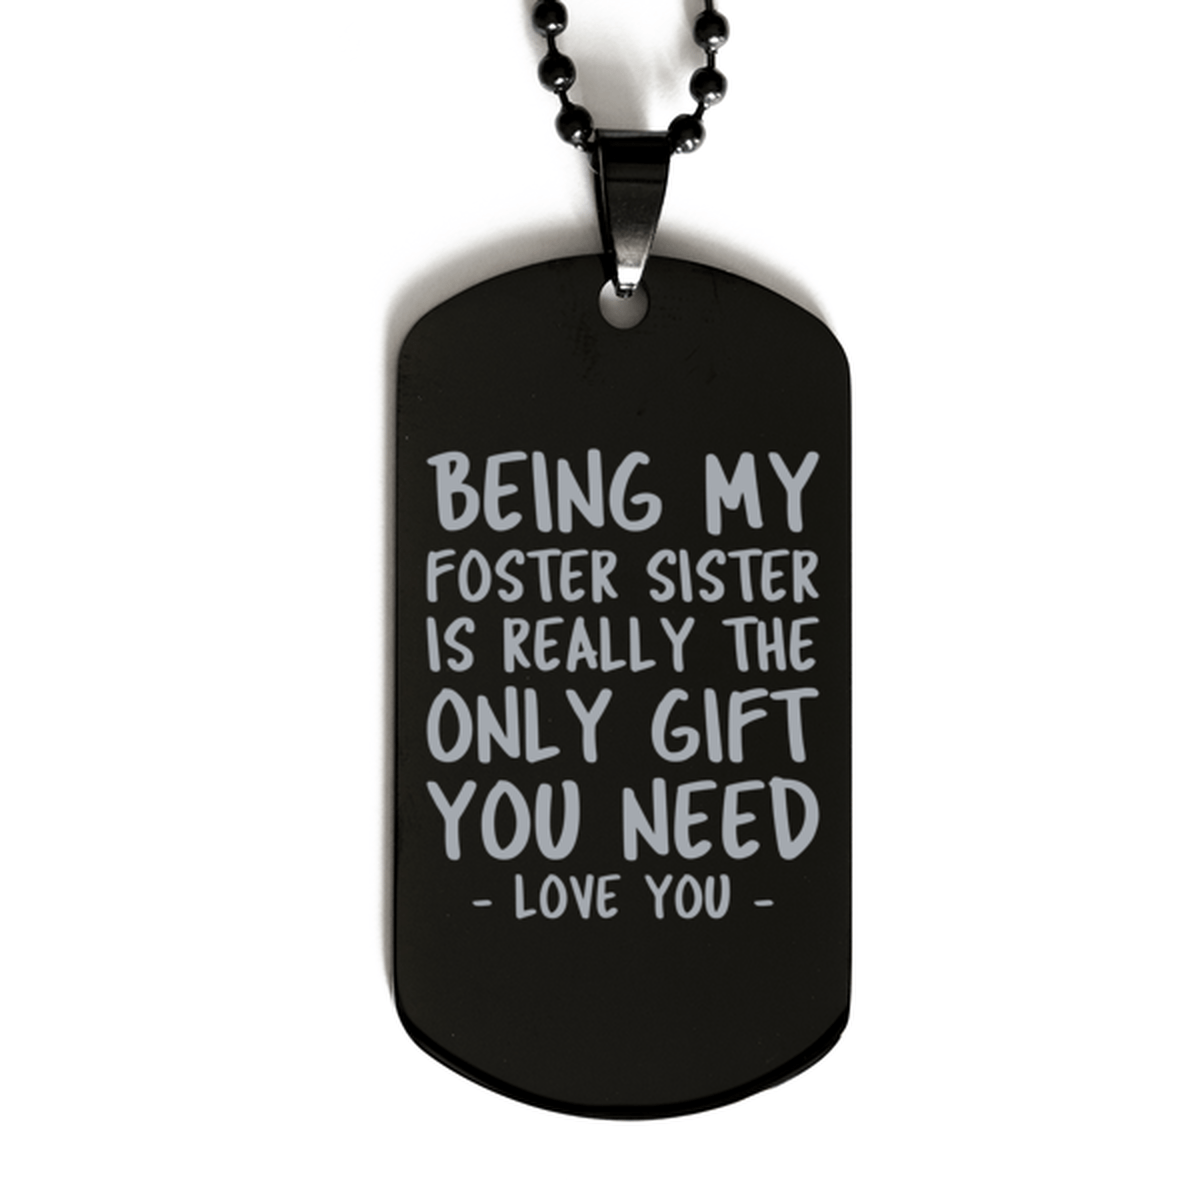 Funny Foster Sister Black Dog Tag Necklace, Being My Foster Sister Is Really the Only Gift You Need, Best Birthday Gifts for Foster Sister